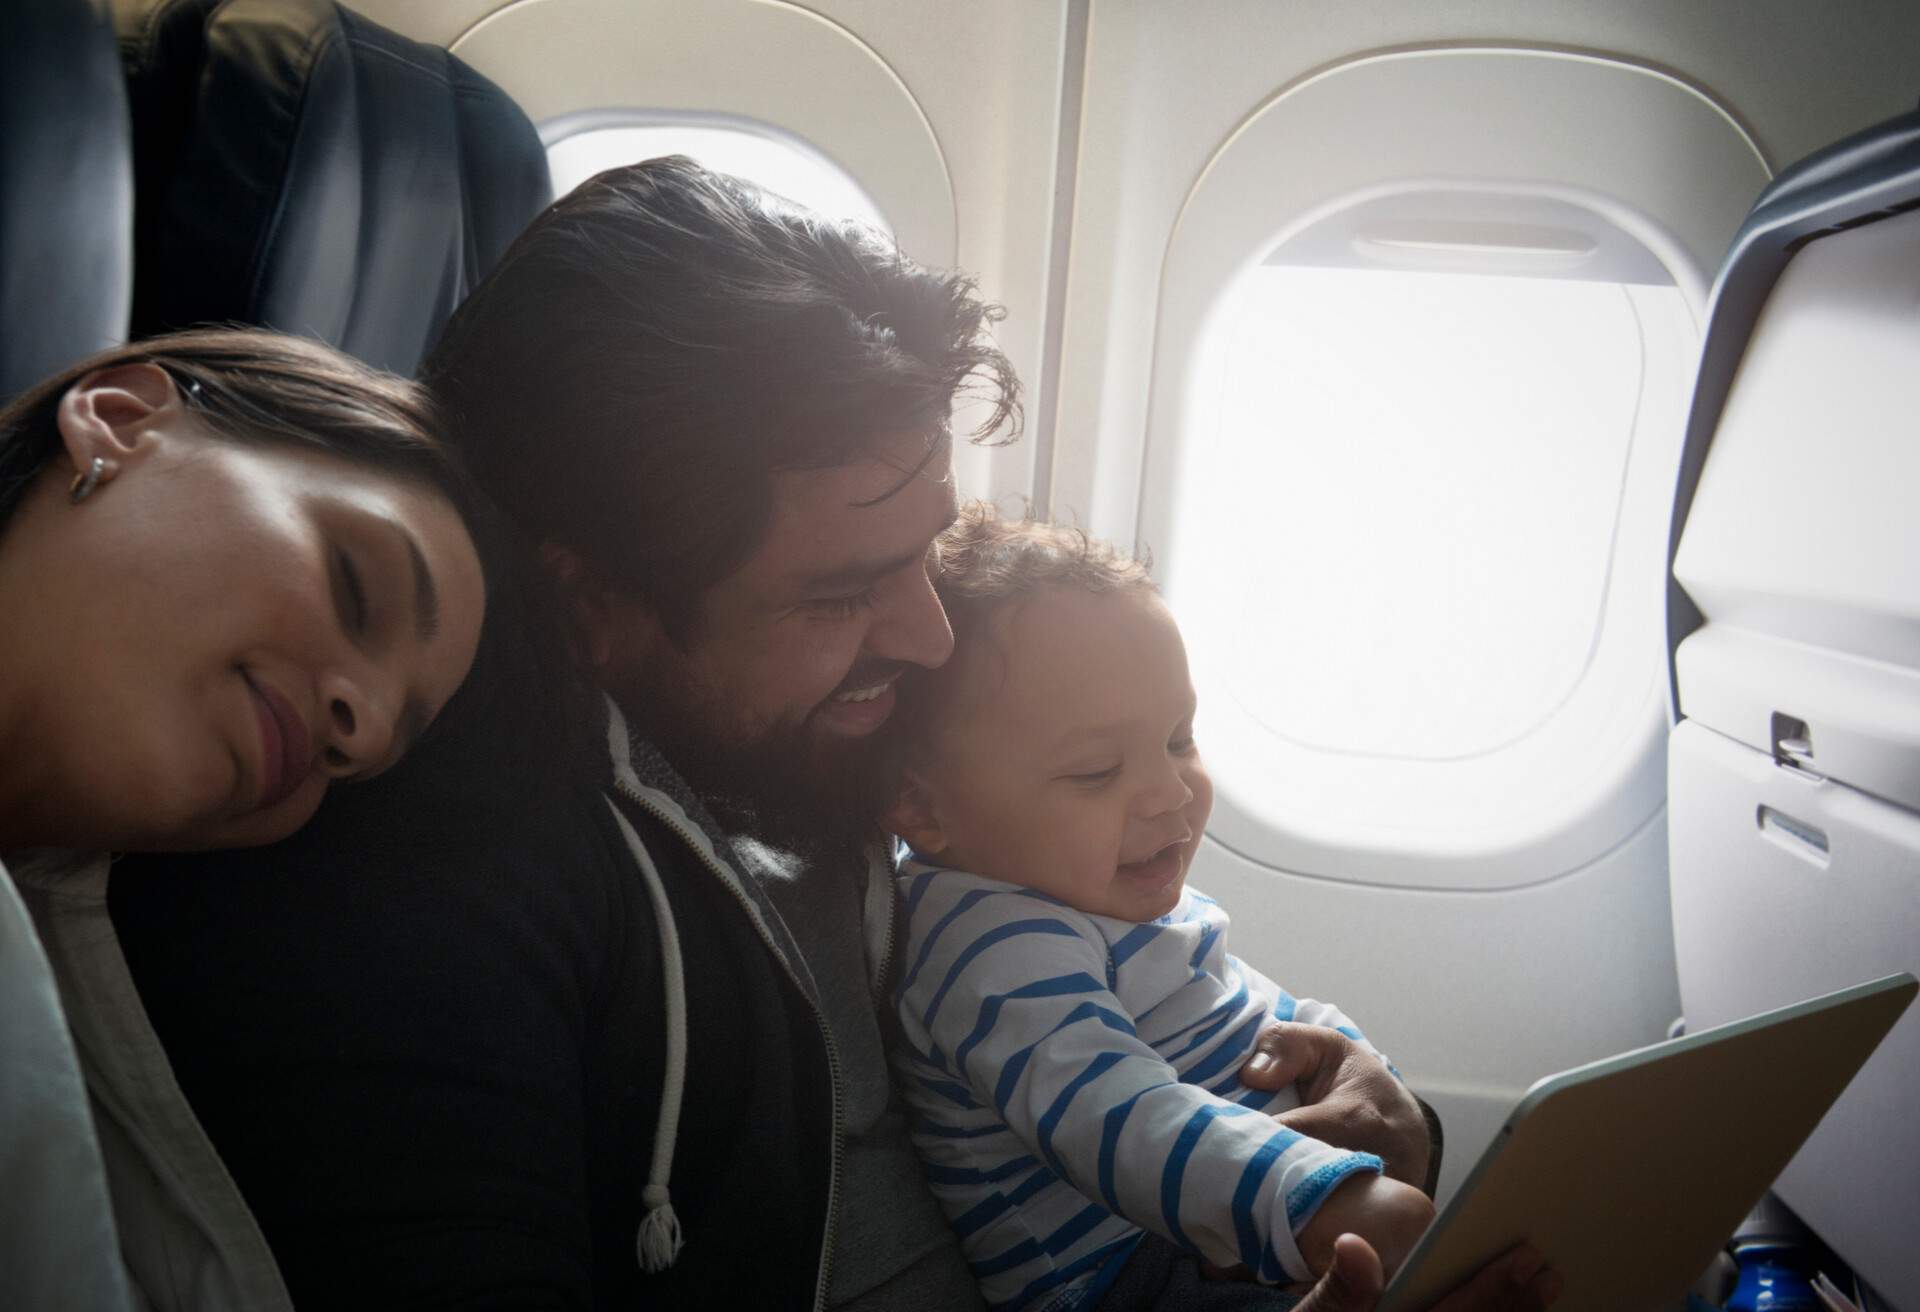 A happy couple with their toddler sitting inside the aeroplane.